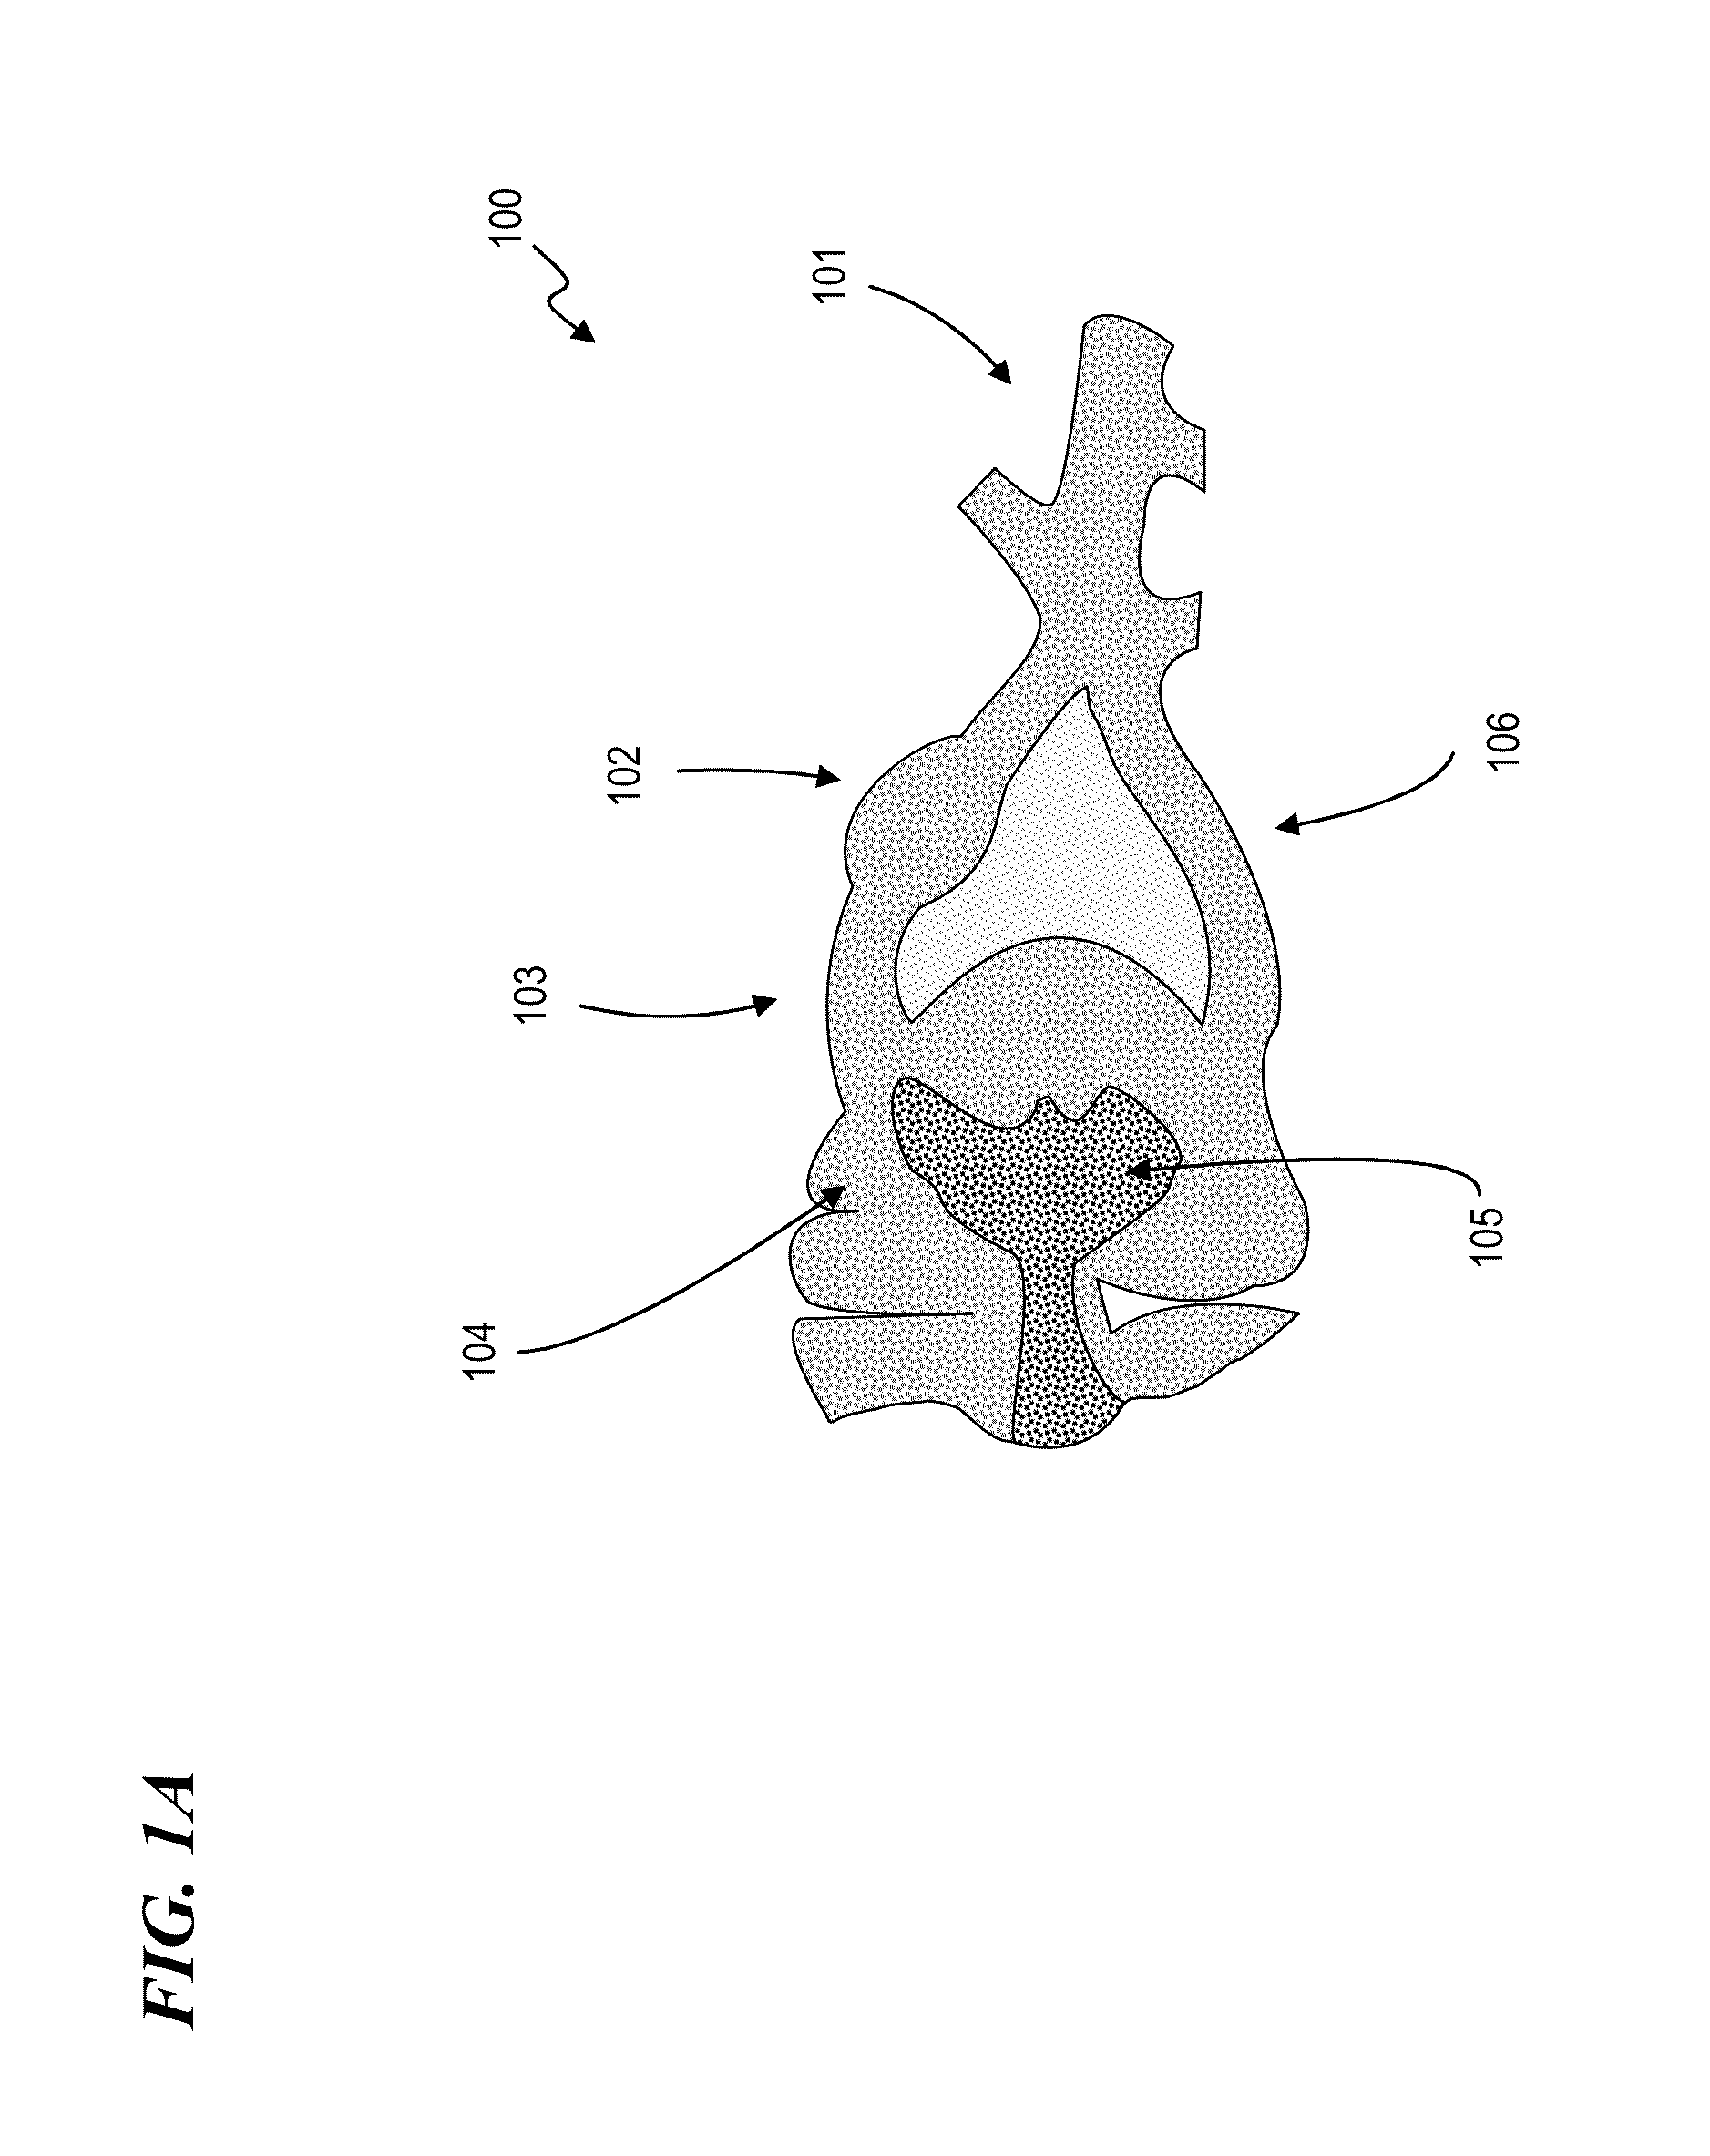 Apparatus and method for managing chronic pain with infrared light sources and heat